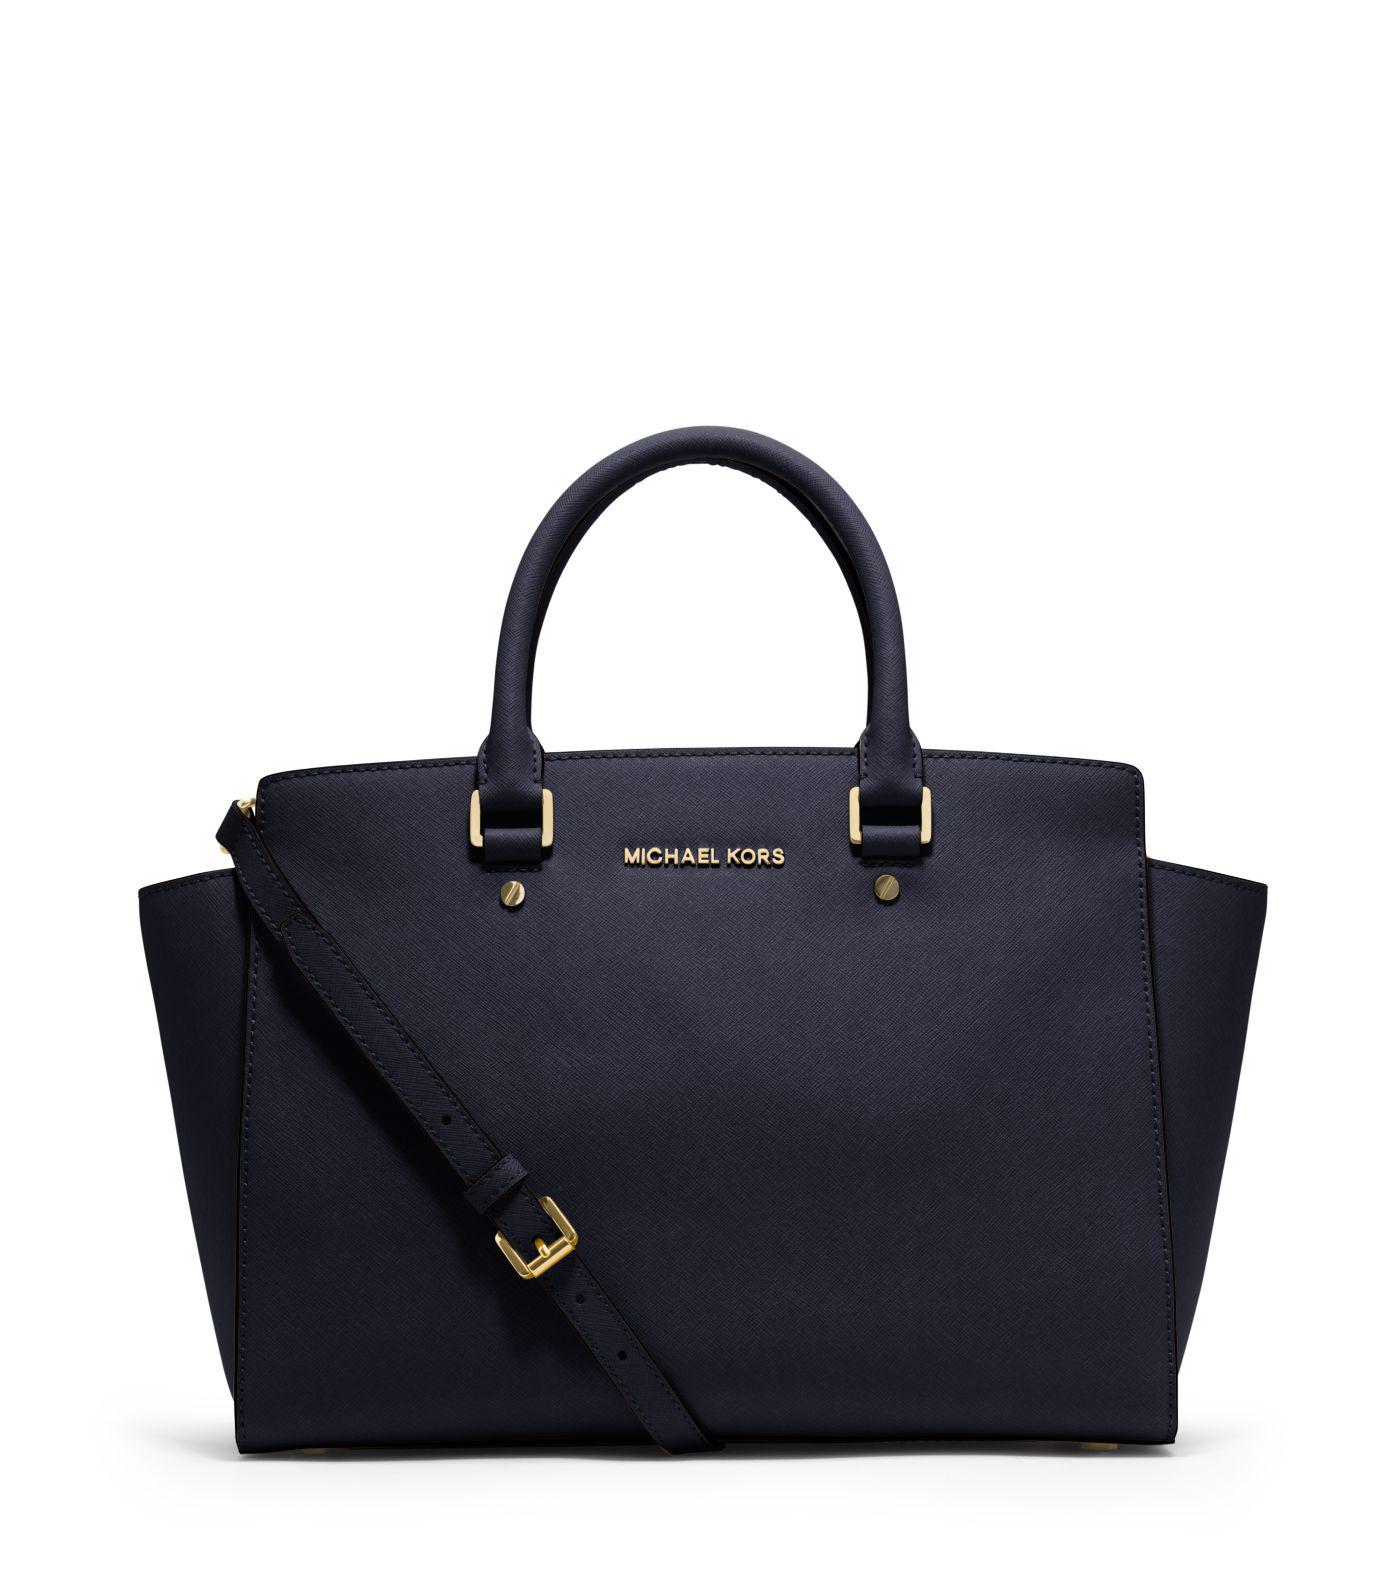 Michael Kors Selma Large Saffiano Leather Satchel in Navy (Blue) - Lyst